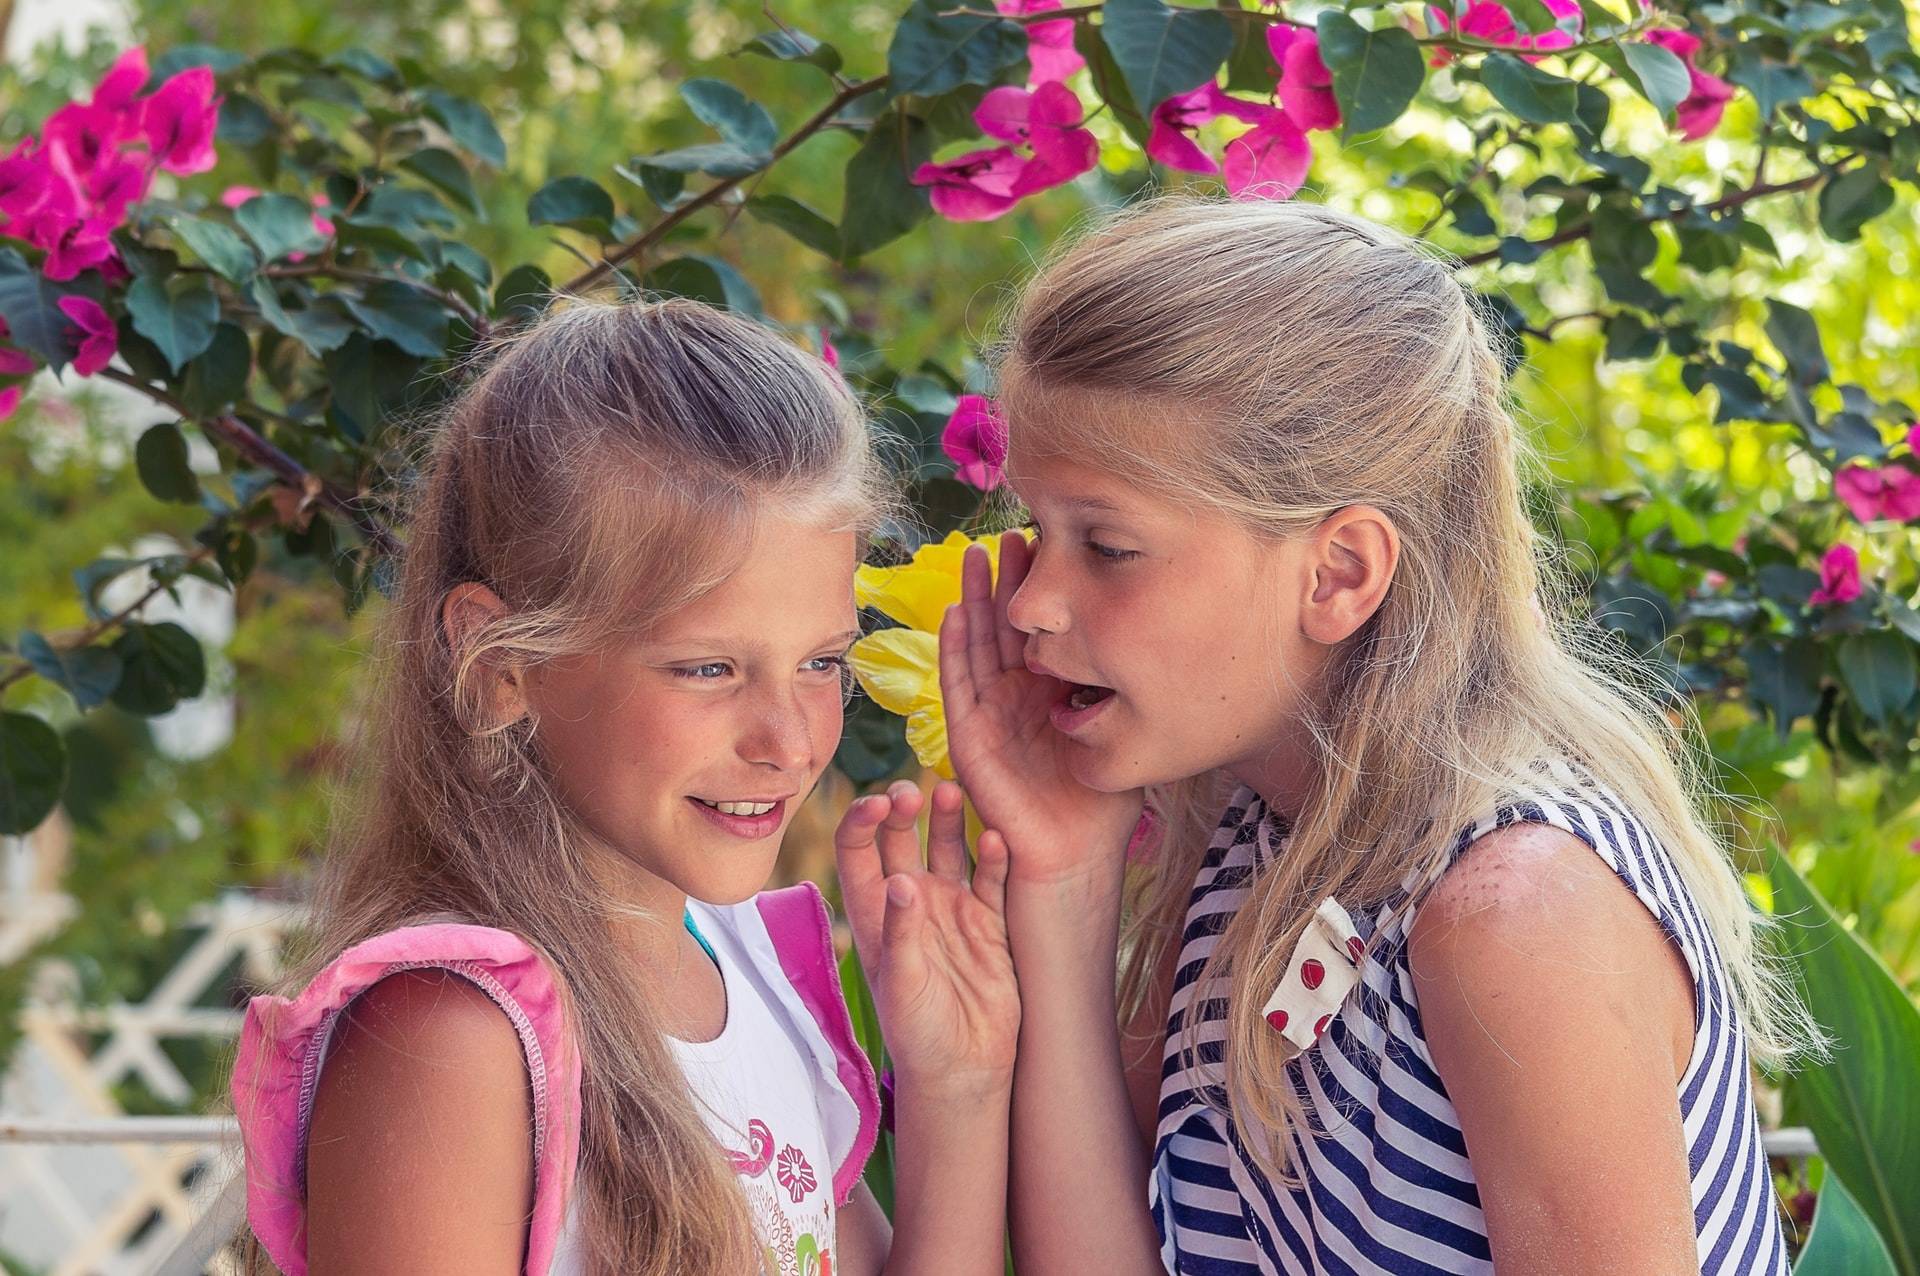 little girl whispering into another girl's ear